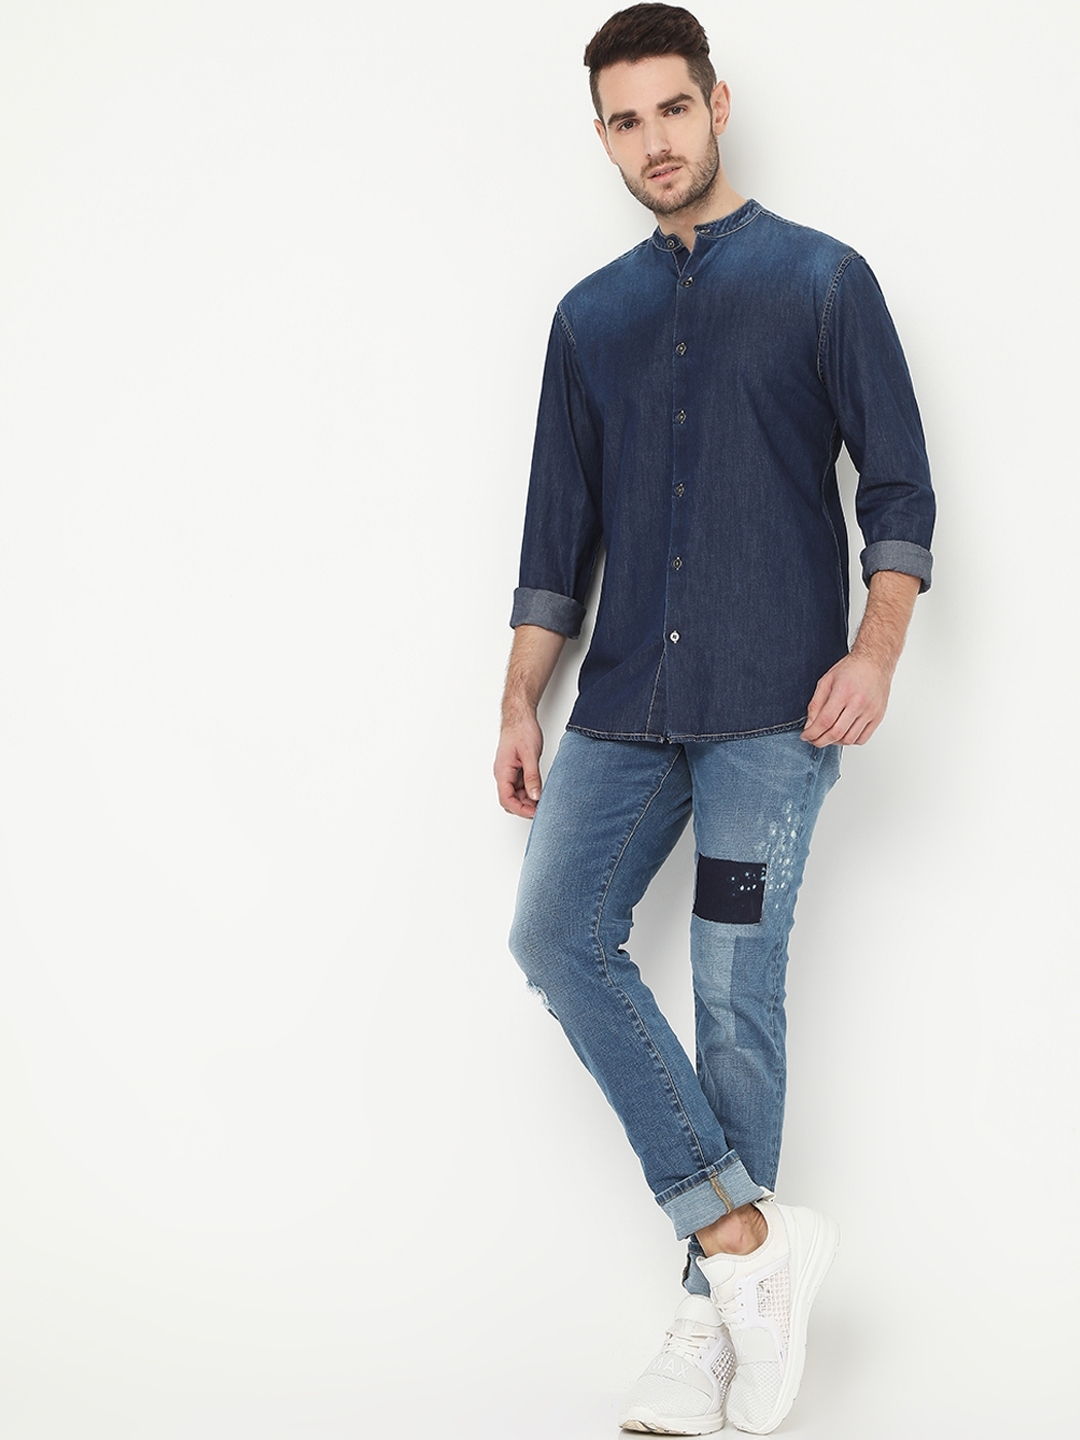 Take Your Wardrobes Fashion Statement to the Next Level Top 10 Trendy Denim  Shirts for Men 2020